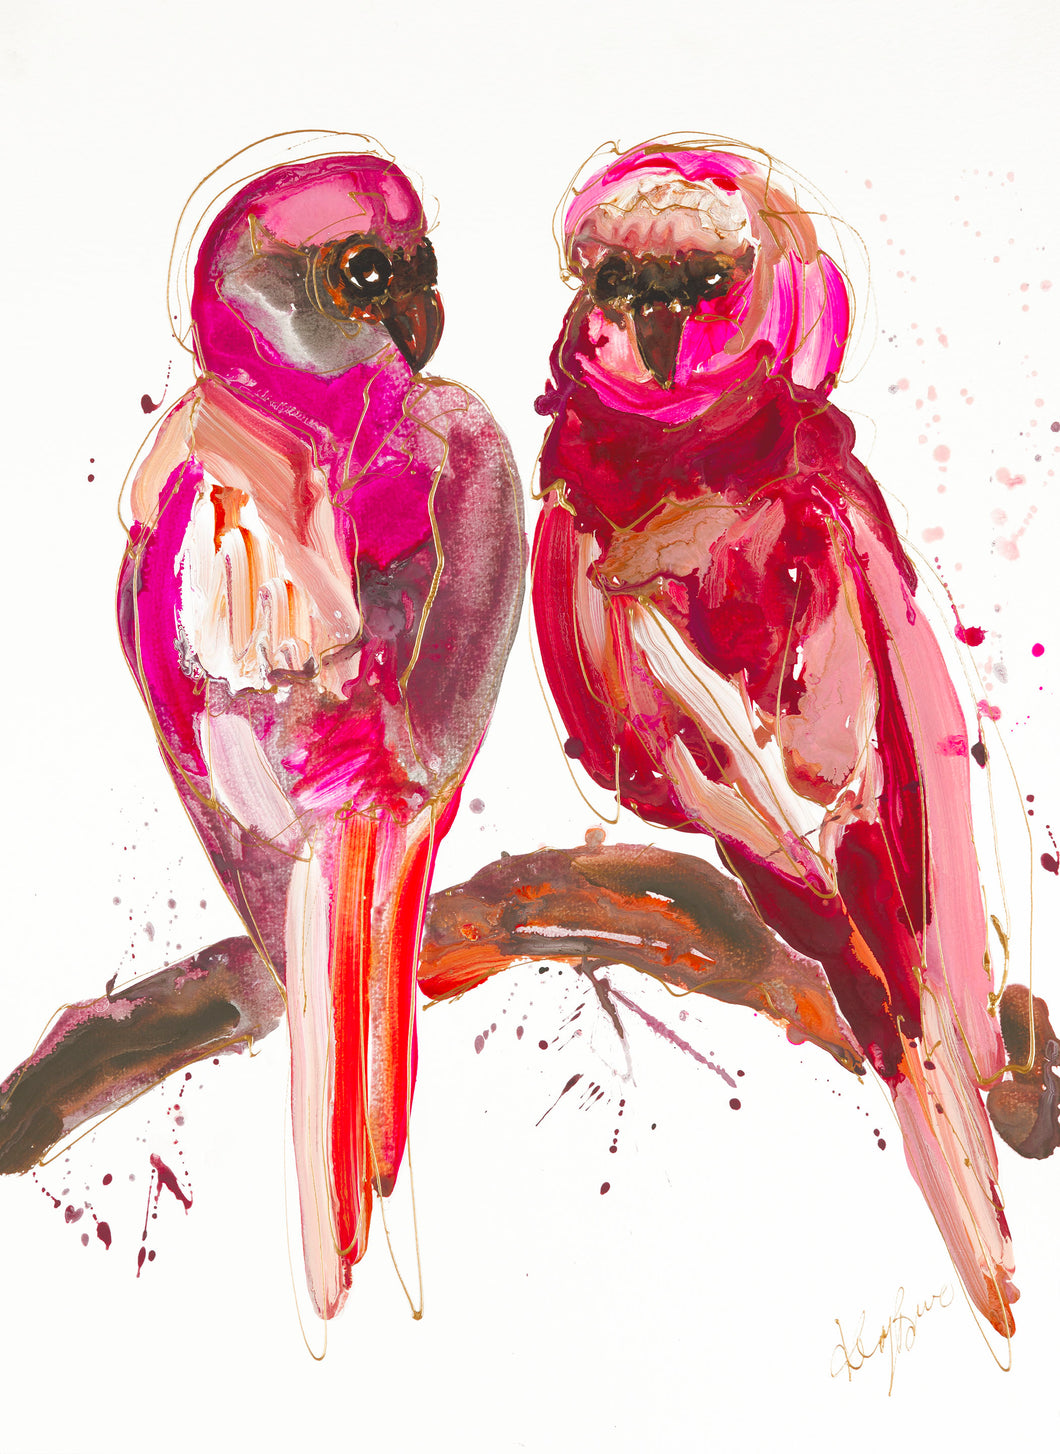 Two birds in shades of hot pink and pale pink, sitting on a branch, painted in abstract style.